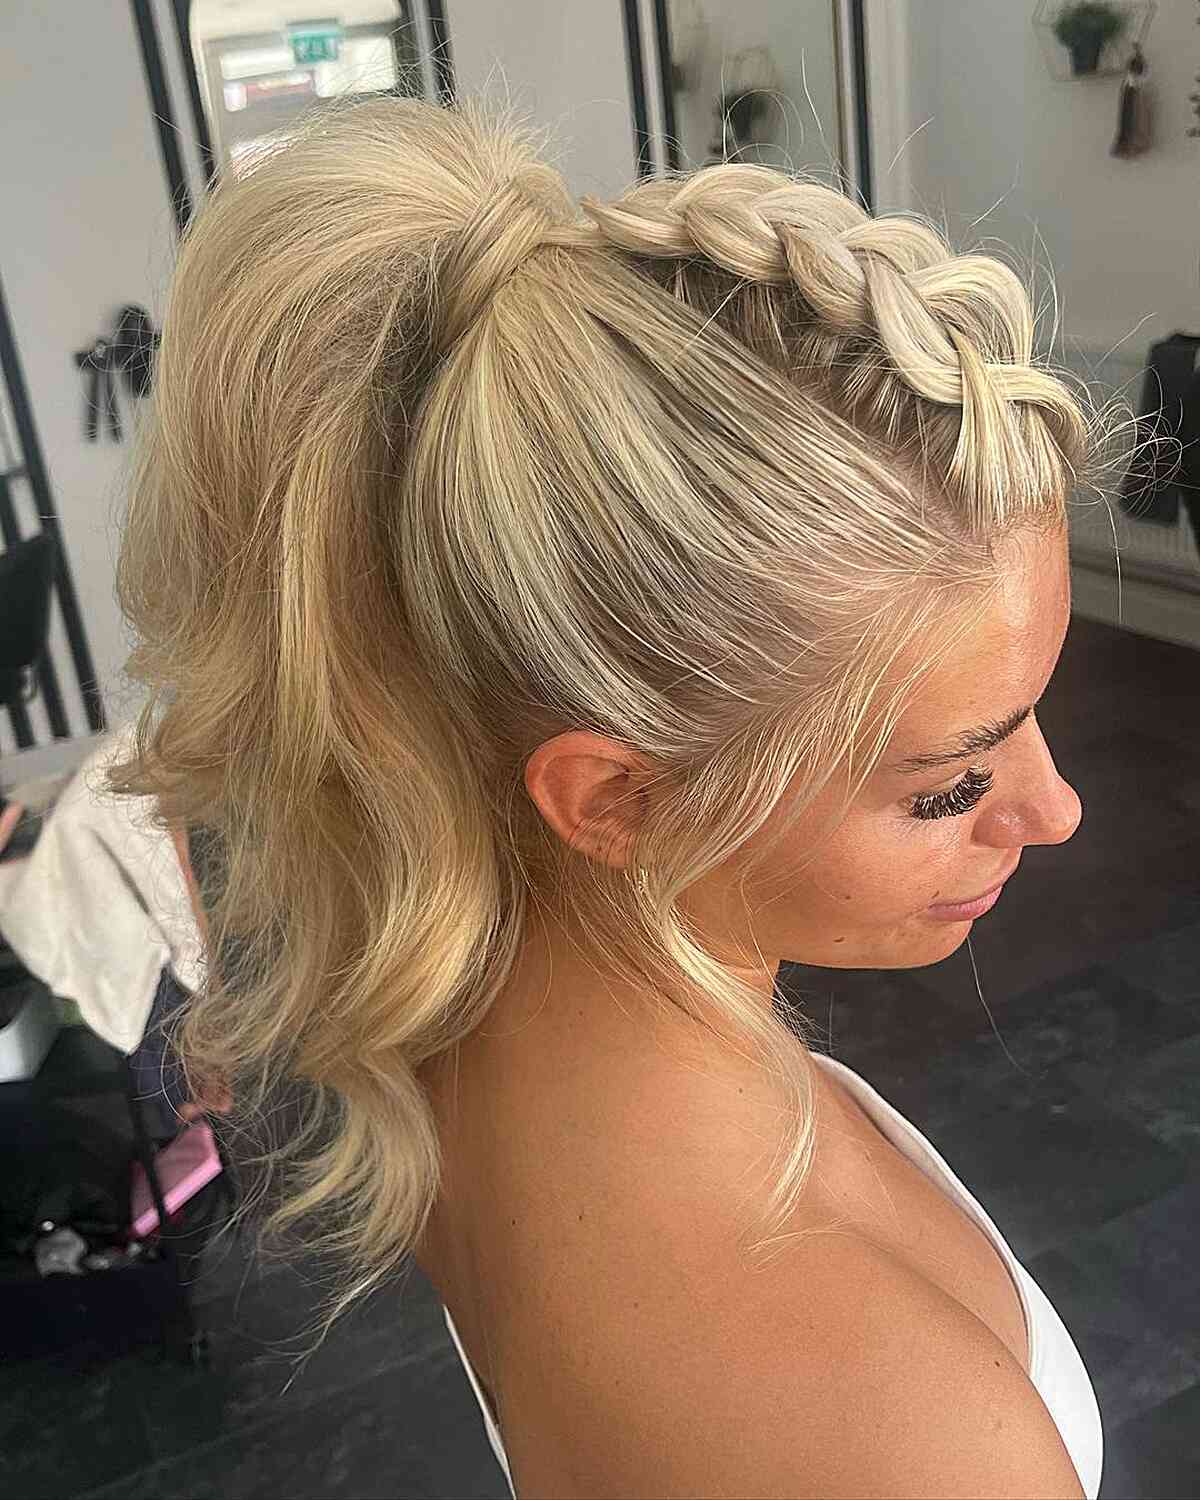 Bridetobe hairgoals | Stylish ponytail, Party hairstyles, Indian party  hairstyles